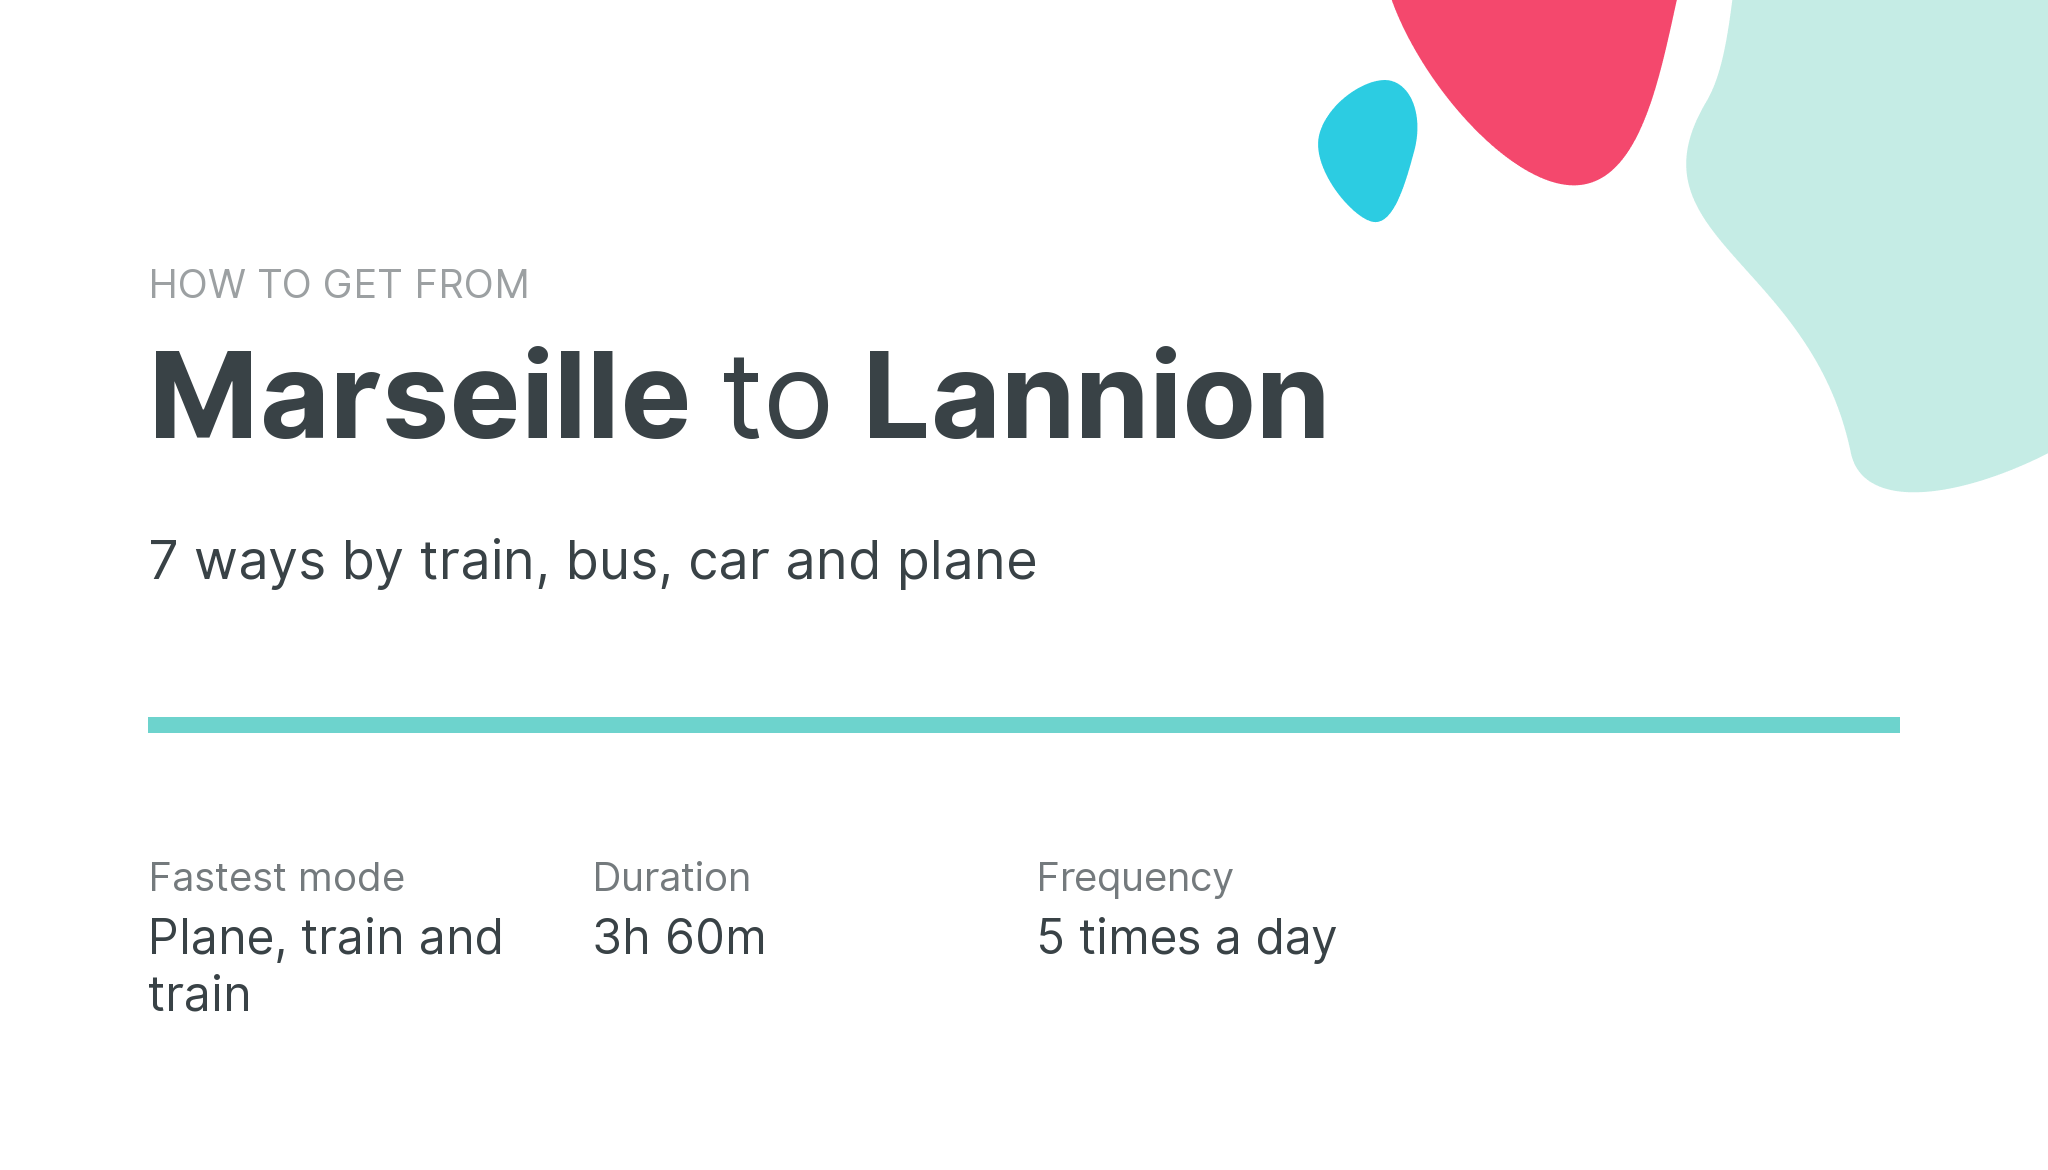 How do I get from Marseille to Lannion